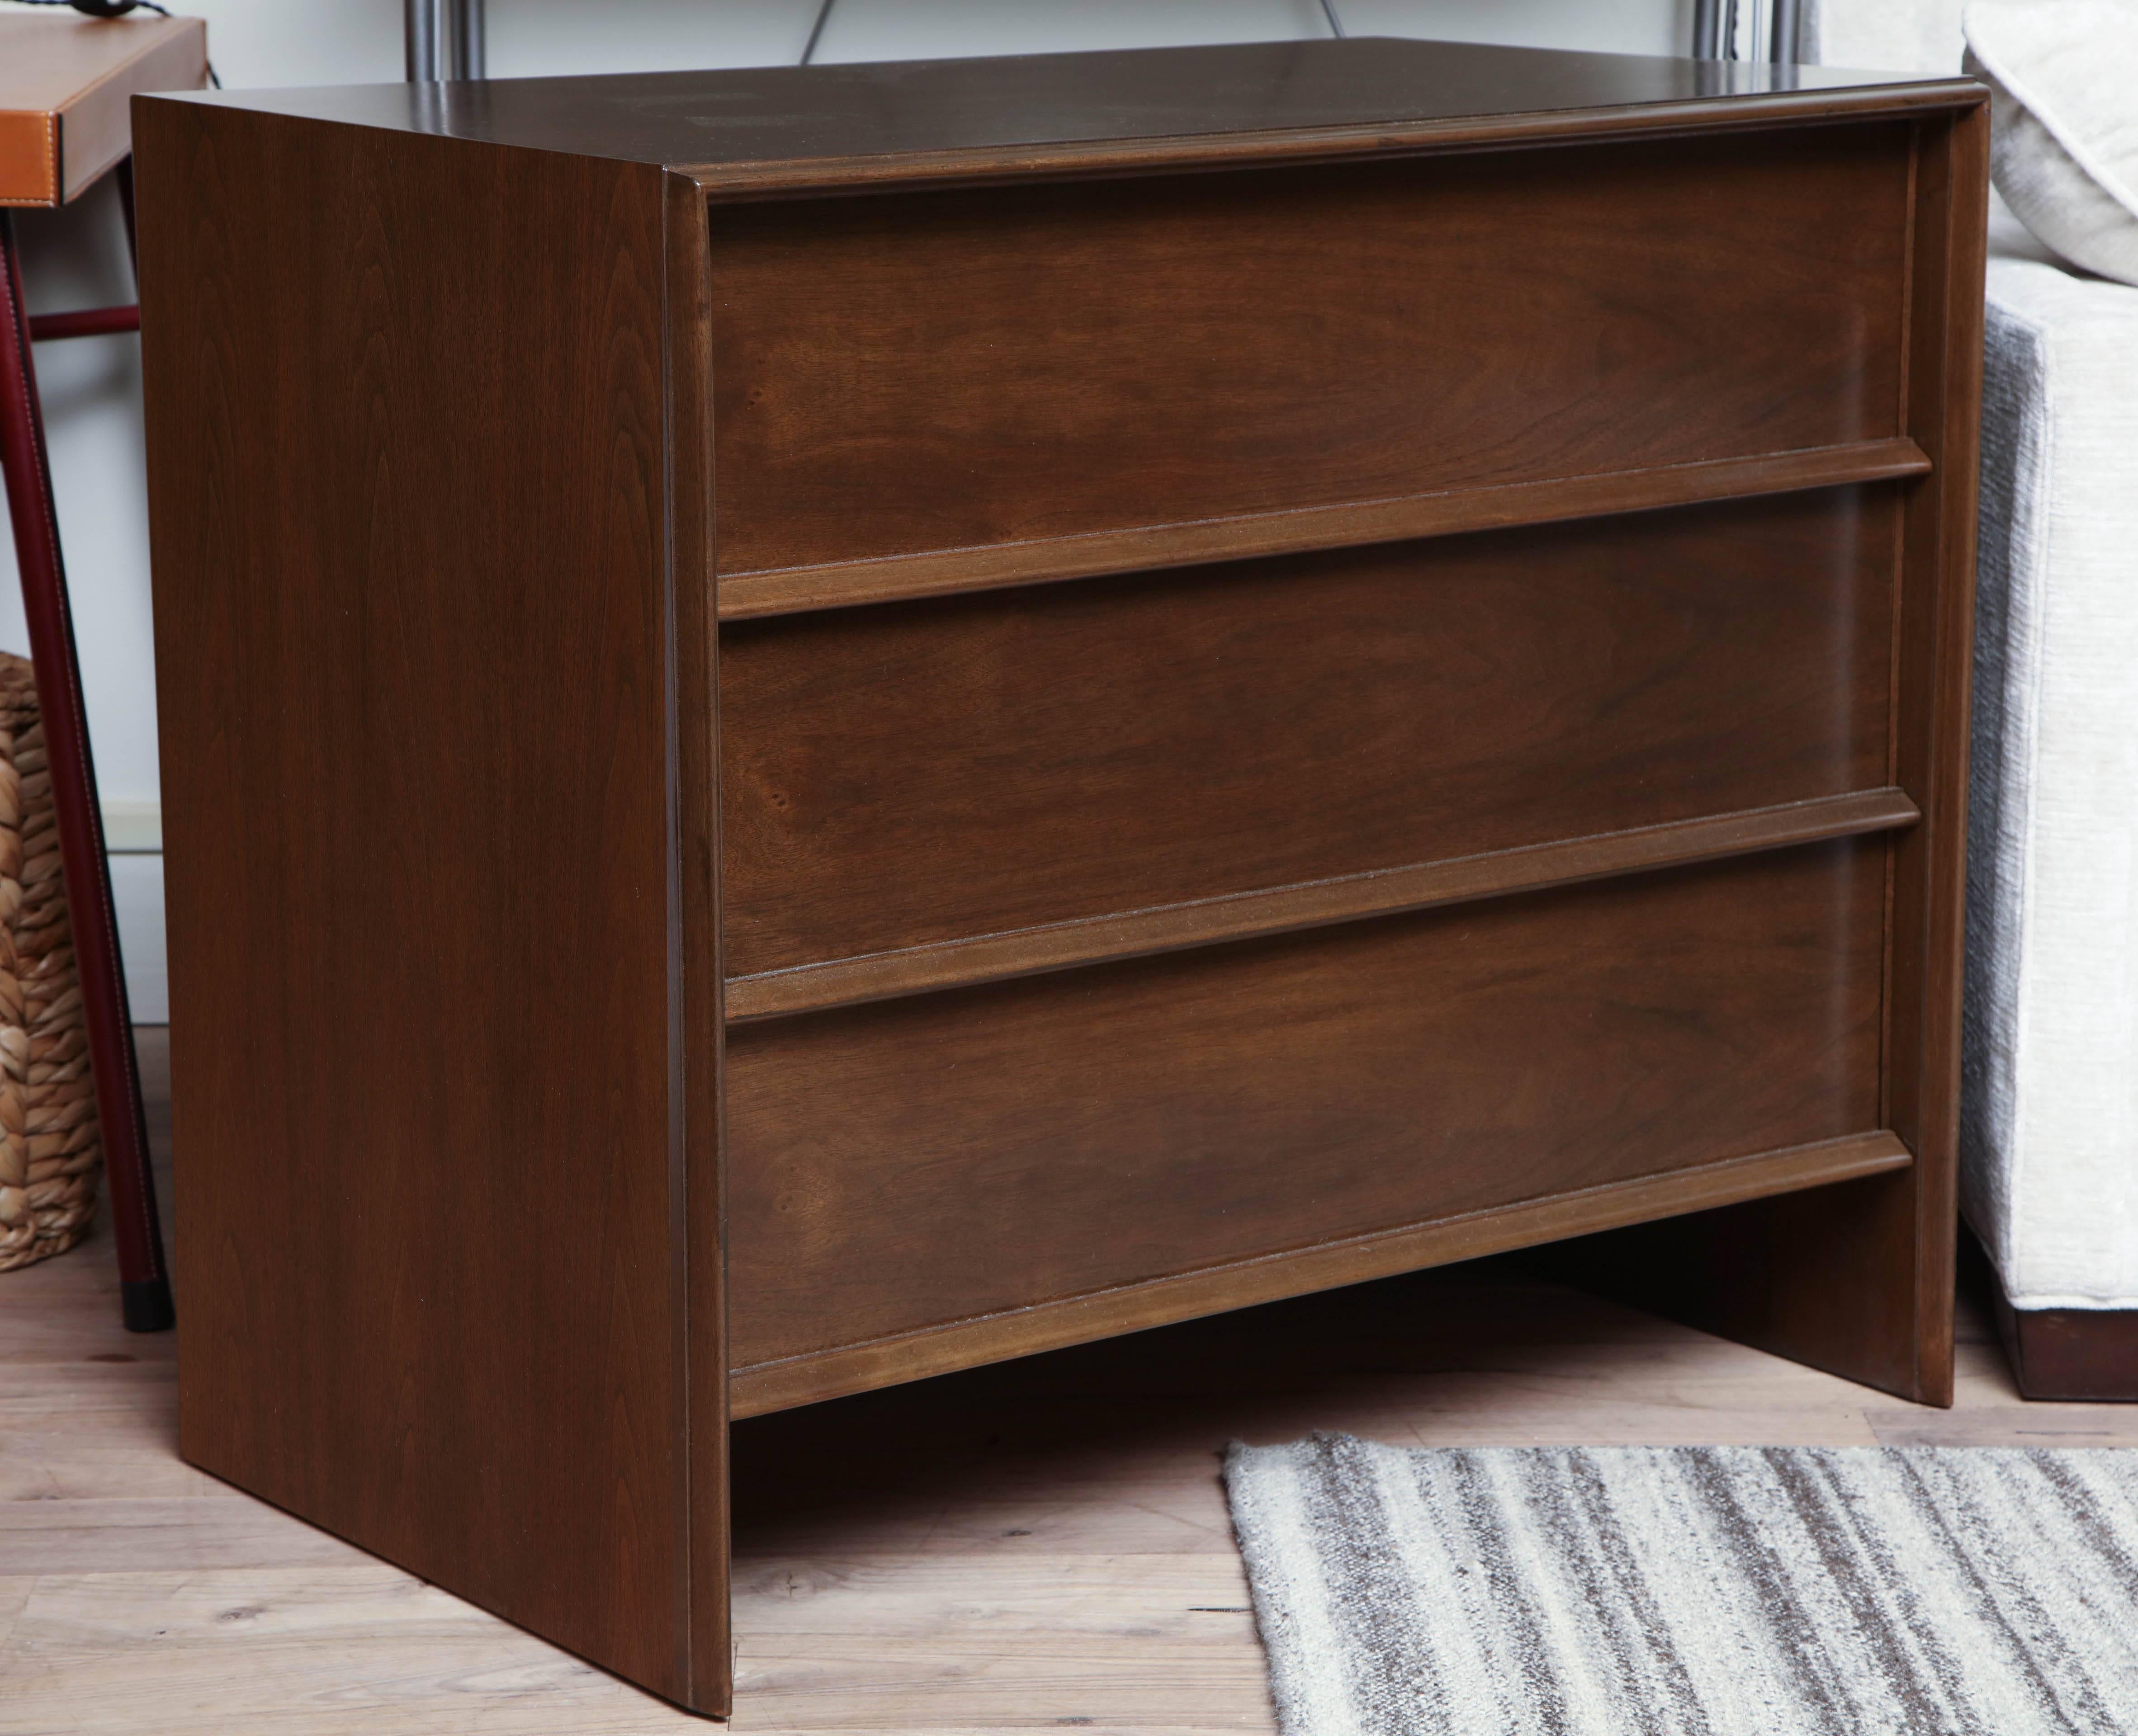 Pair of three-drawer chests or large nightstands with translucent medium walnut finish, circa 1950. In the manner of T.H. Robsjohn-Gibbings.